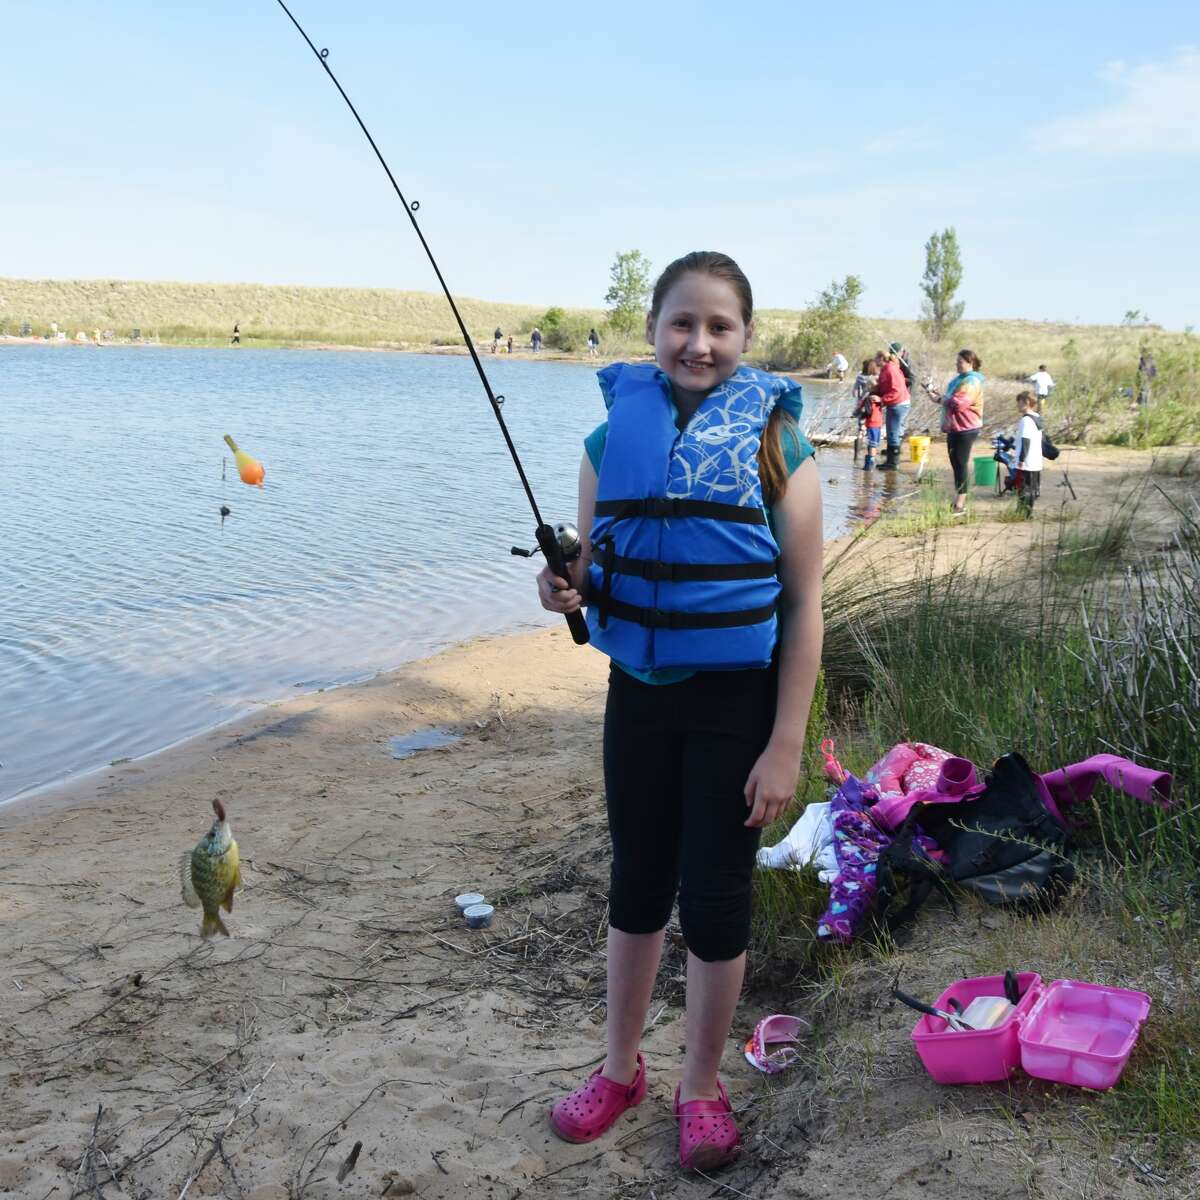 Emma Campbell caught a bluegill on her first cast at Man Made Lake during the Kids Fish Day event.